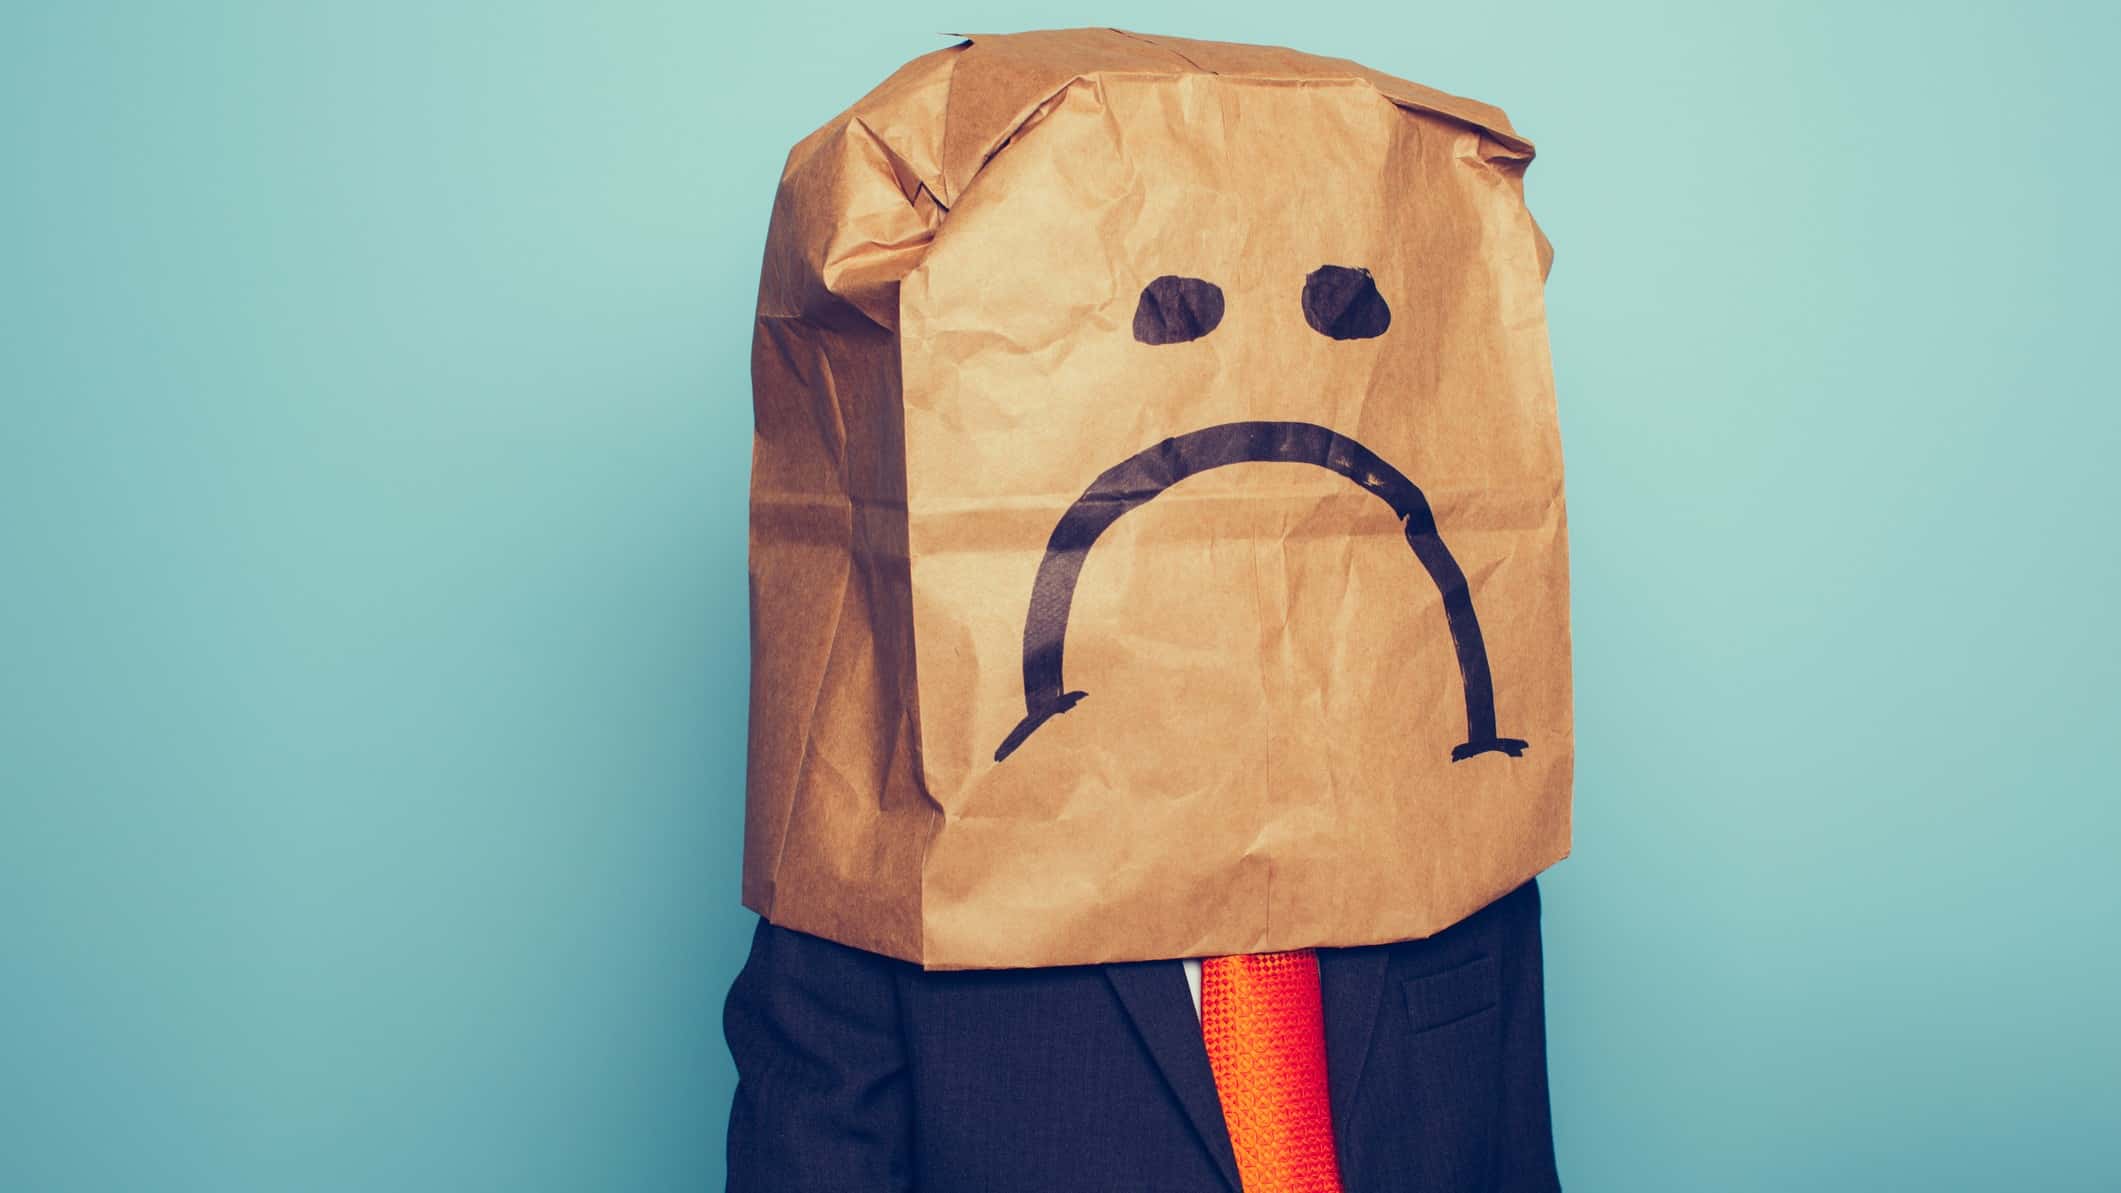 asx share price falling lower represented by investor wearing paper bag on head with sad face